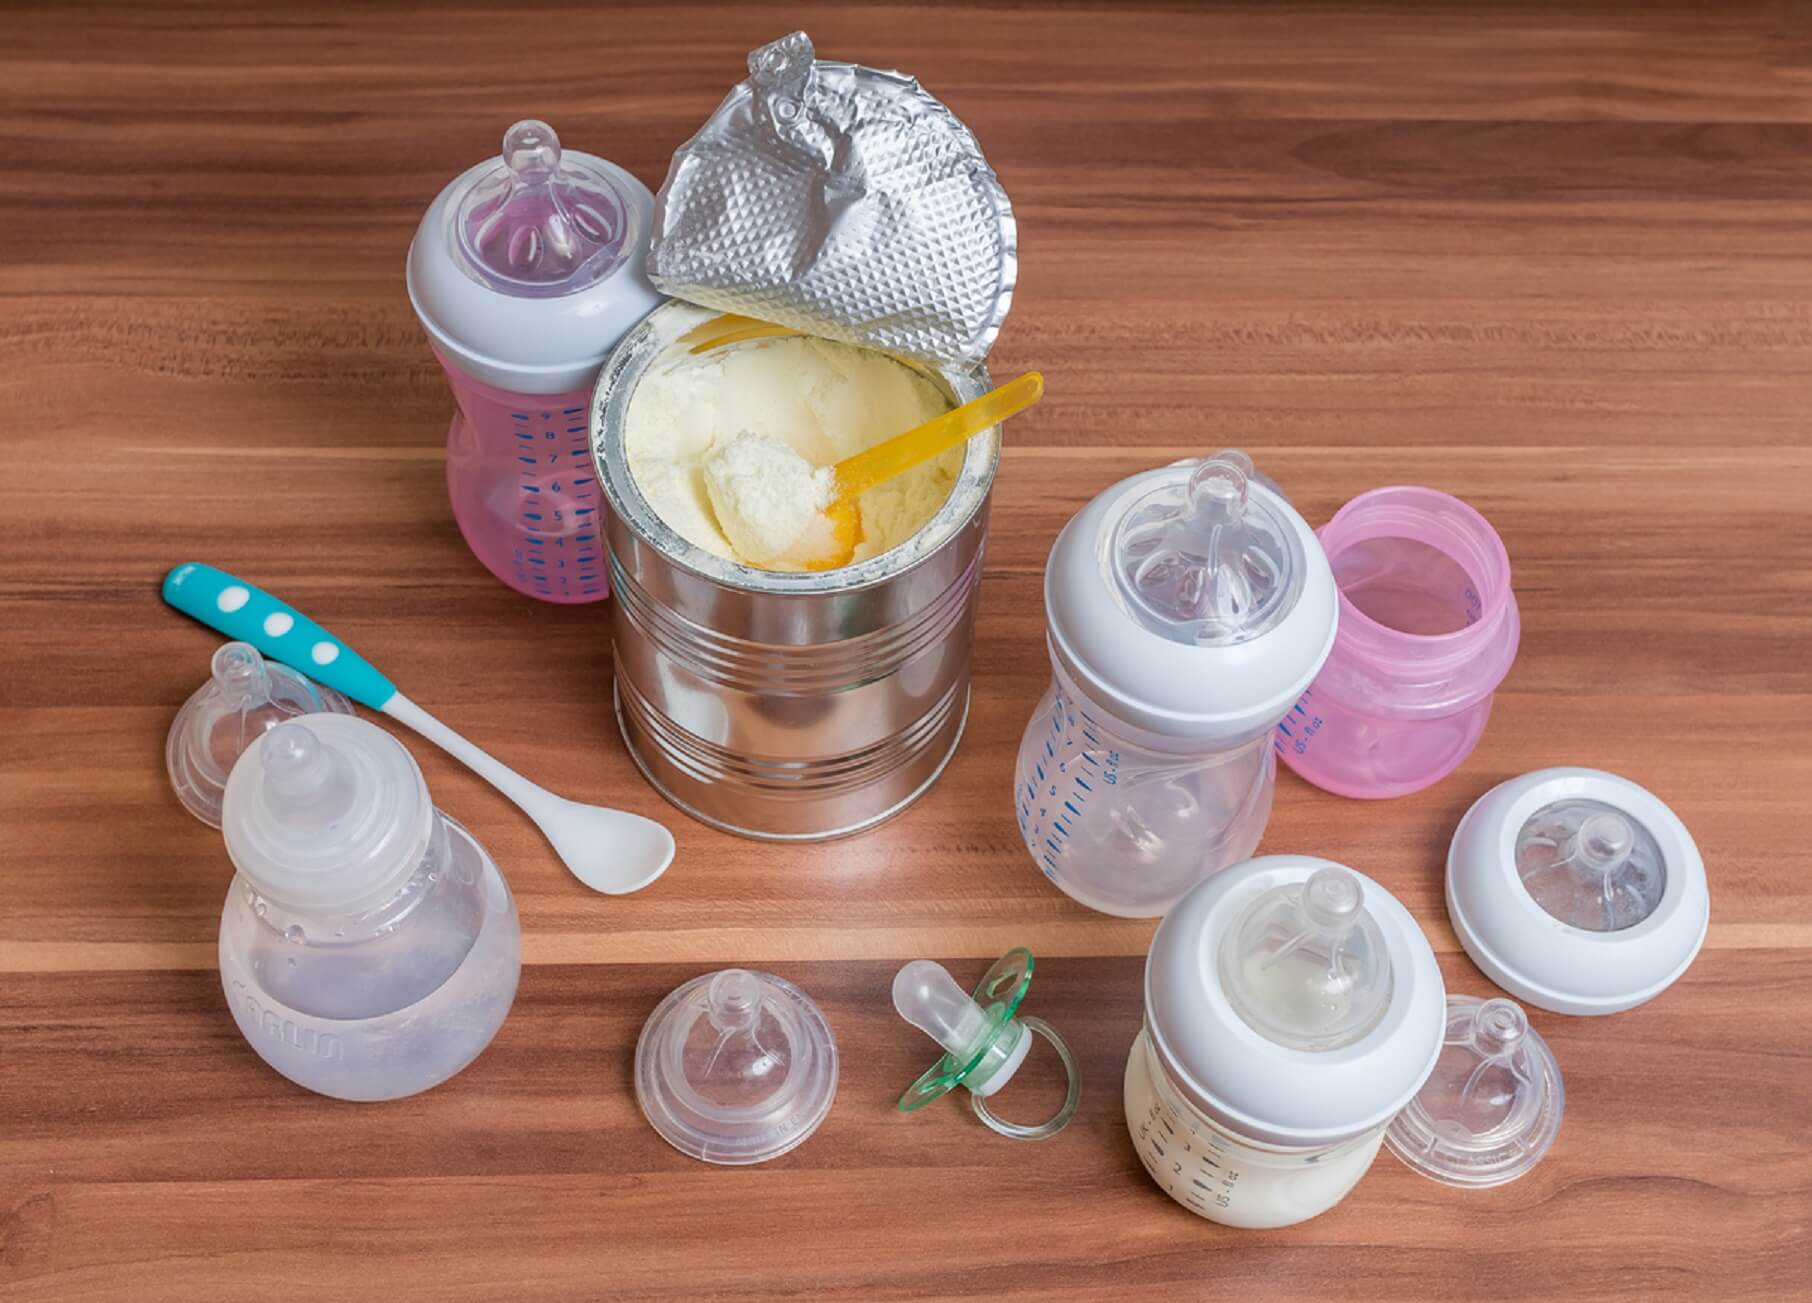 A can of powdered baby formula surrounded by bottles, a pacifier, and a baby spoon.